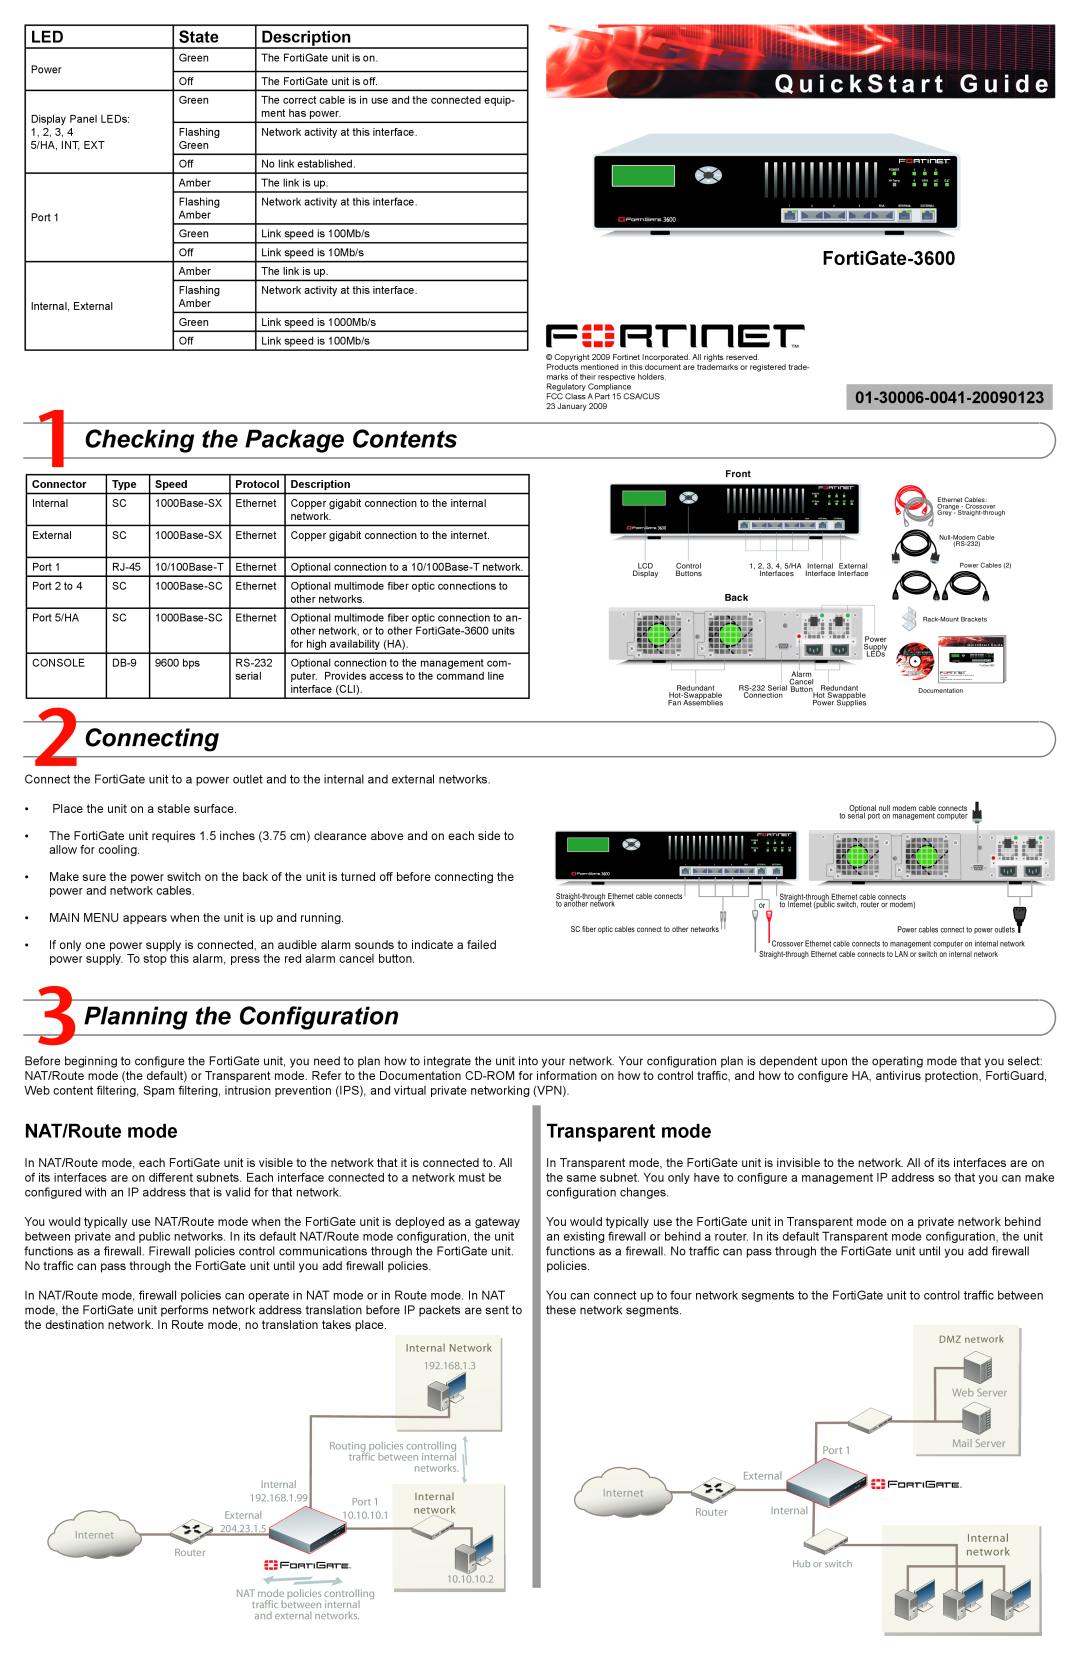 Fortinet quick start Checking the Package Contents, Connecting, Planning the Configuration, FortiGate-3600, State 